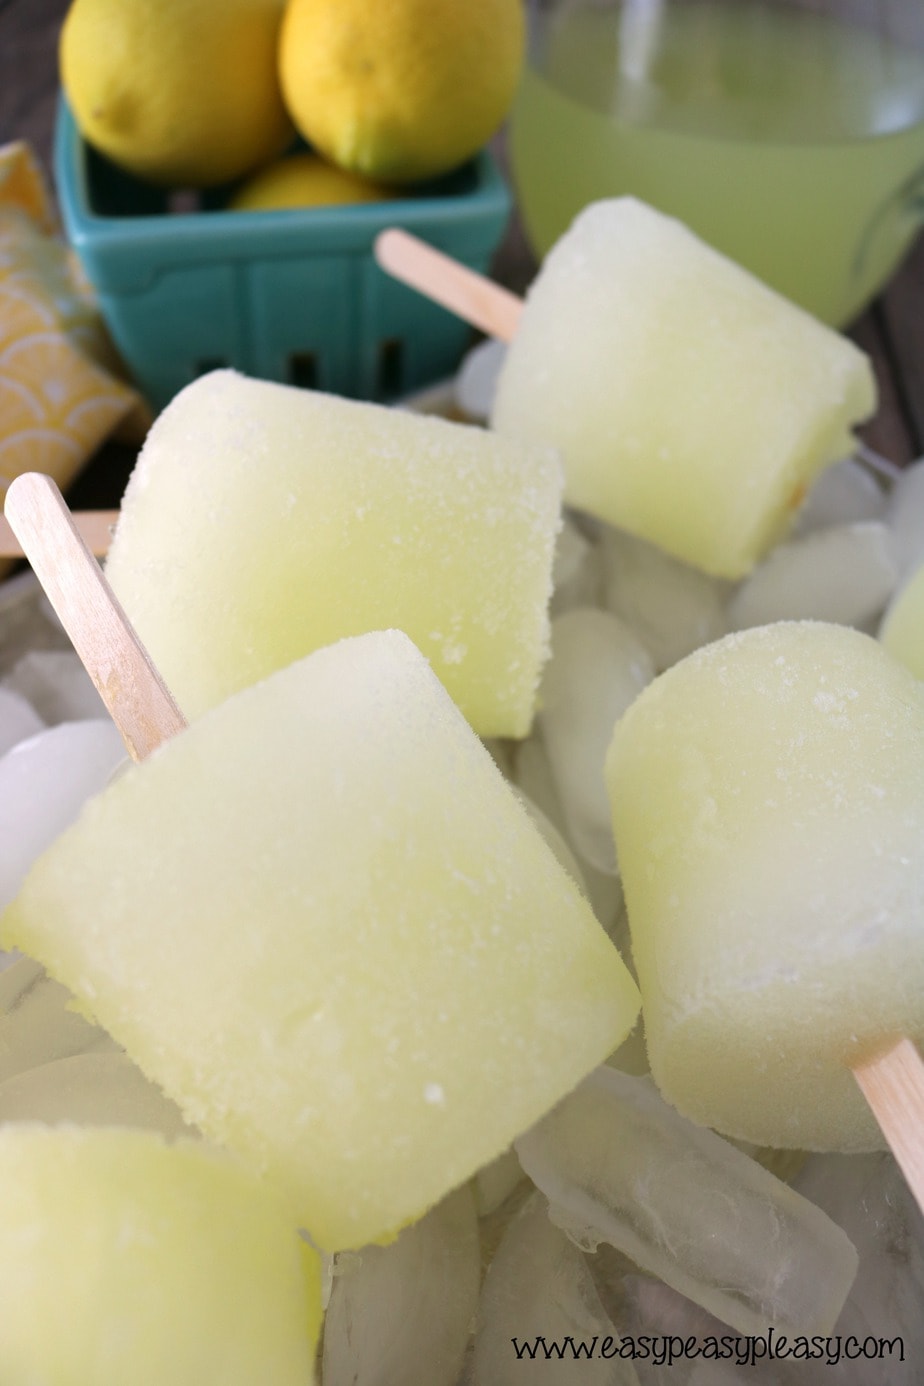 If you have the freezer space, you should give these super easy homemade popsicles a go. Check out the step by step instructions on how to get it done.